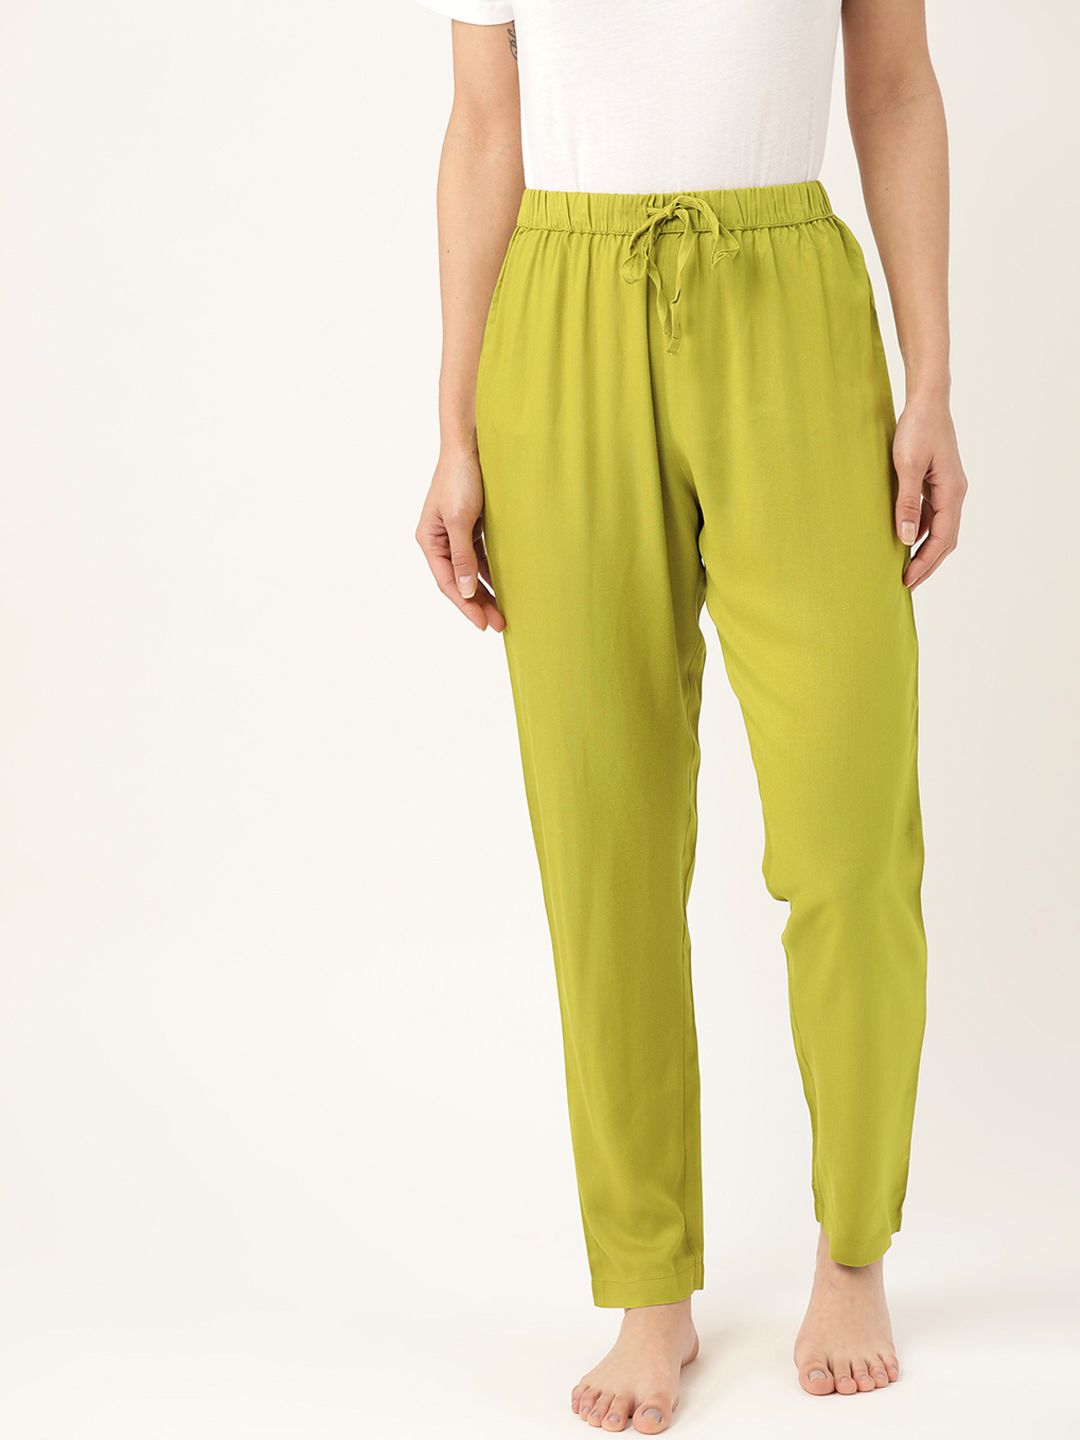 ETC Women Lime Green Solid Lounge Pants Price in India